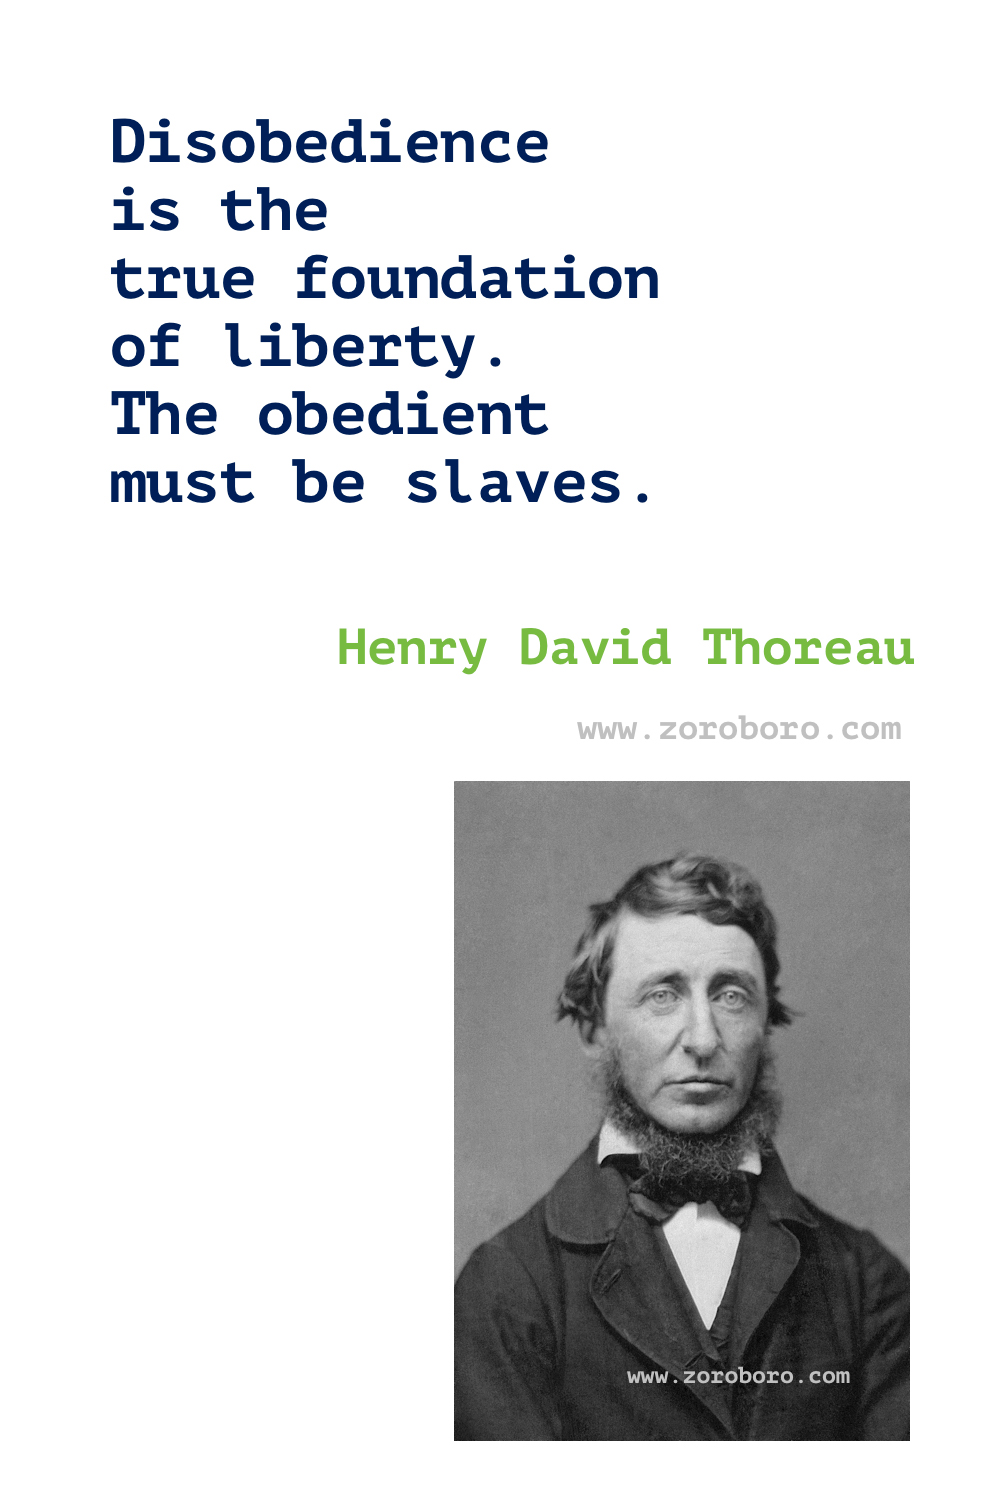 Henry David Thoreau Quotes. Henry David Thoreau Walden Quotes. Henry David Thoreau Nature Quotes.Henry David Thoreau Poems. Henry David Thoreau Quotes. Civil Disobedience/On the Duty of Civil Disobedience Quotes. Henry David Thoreau Inspirational Quotes.